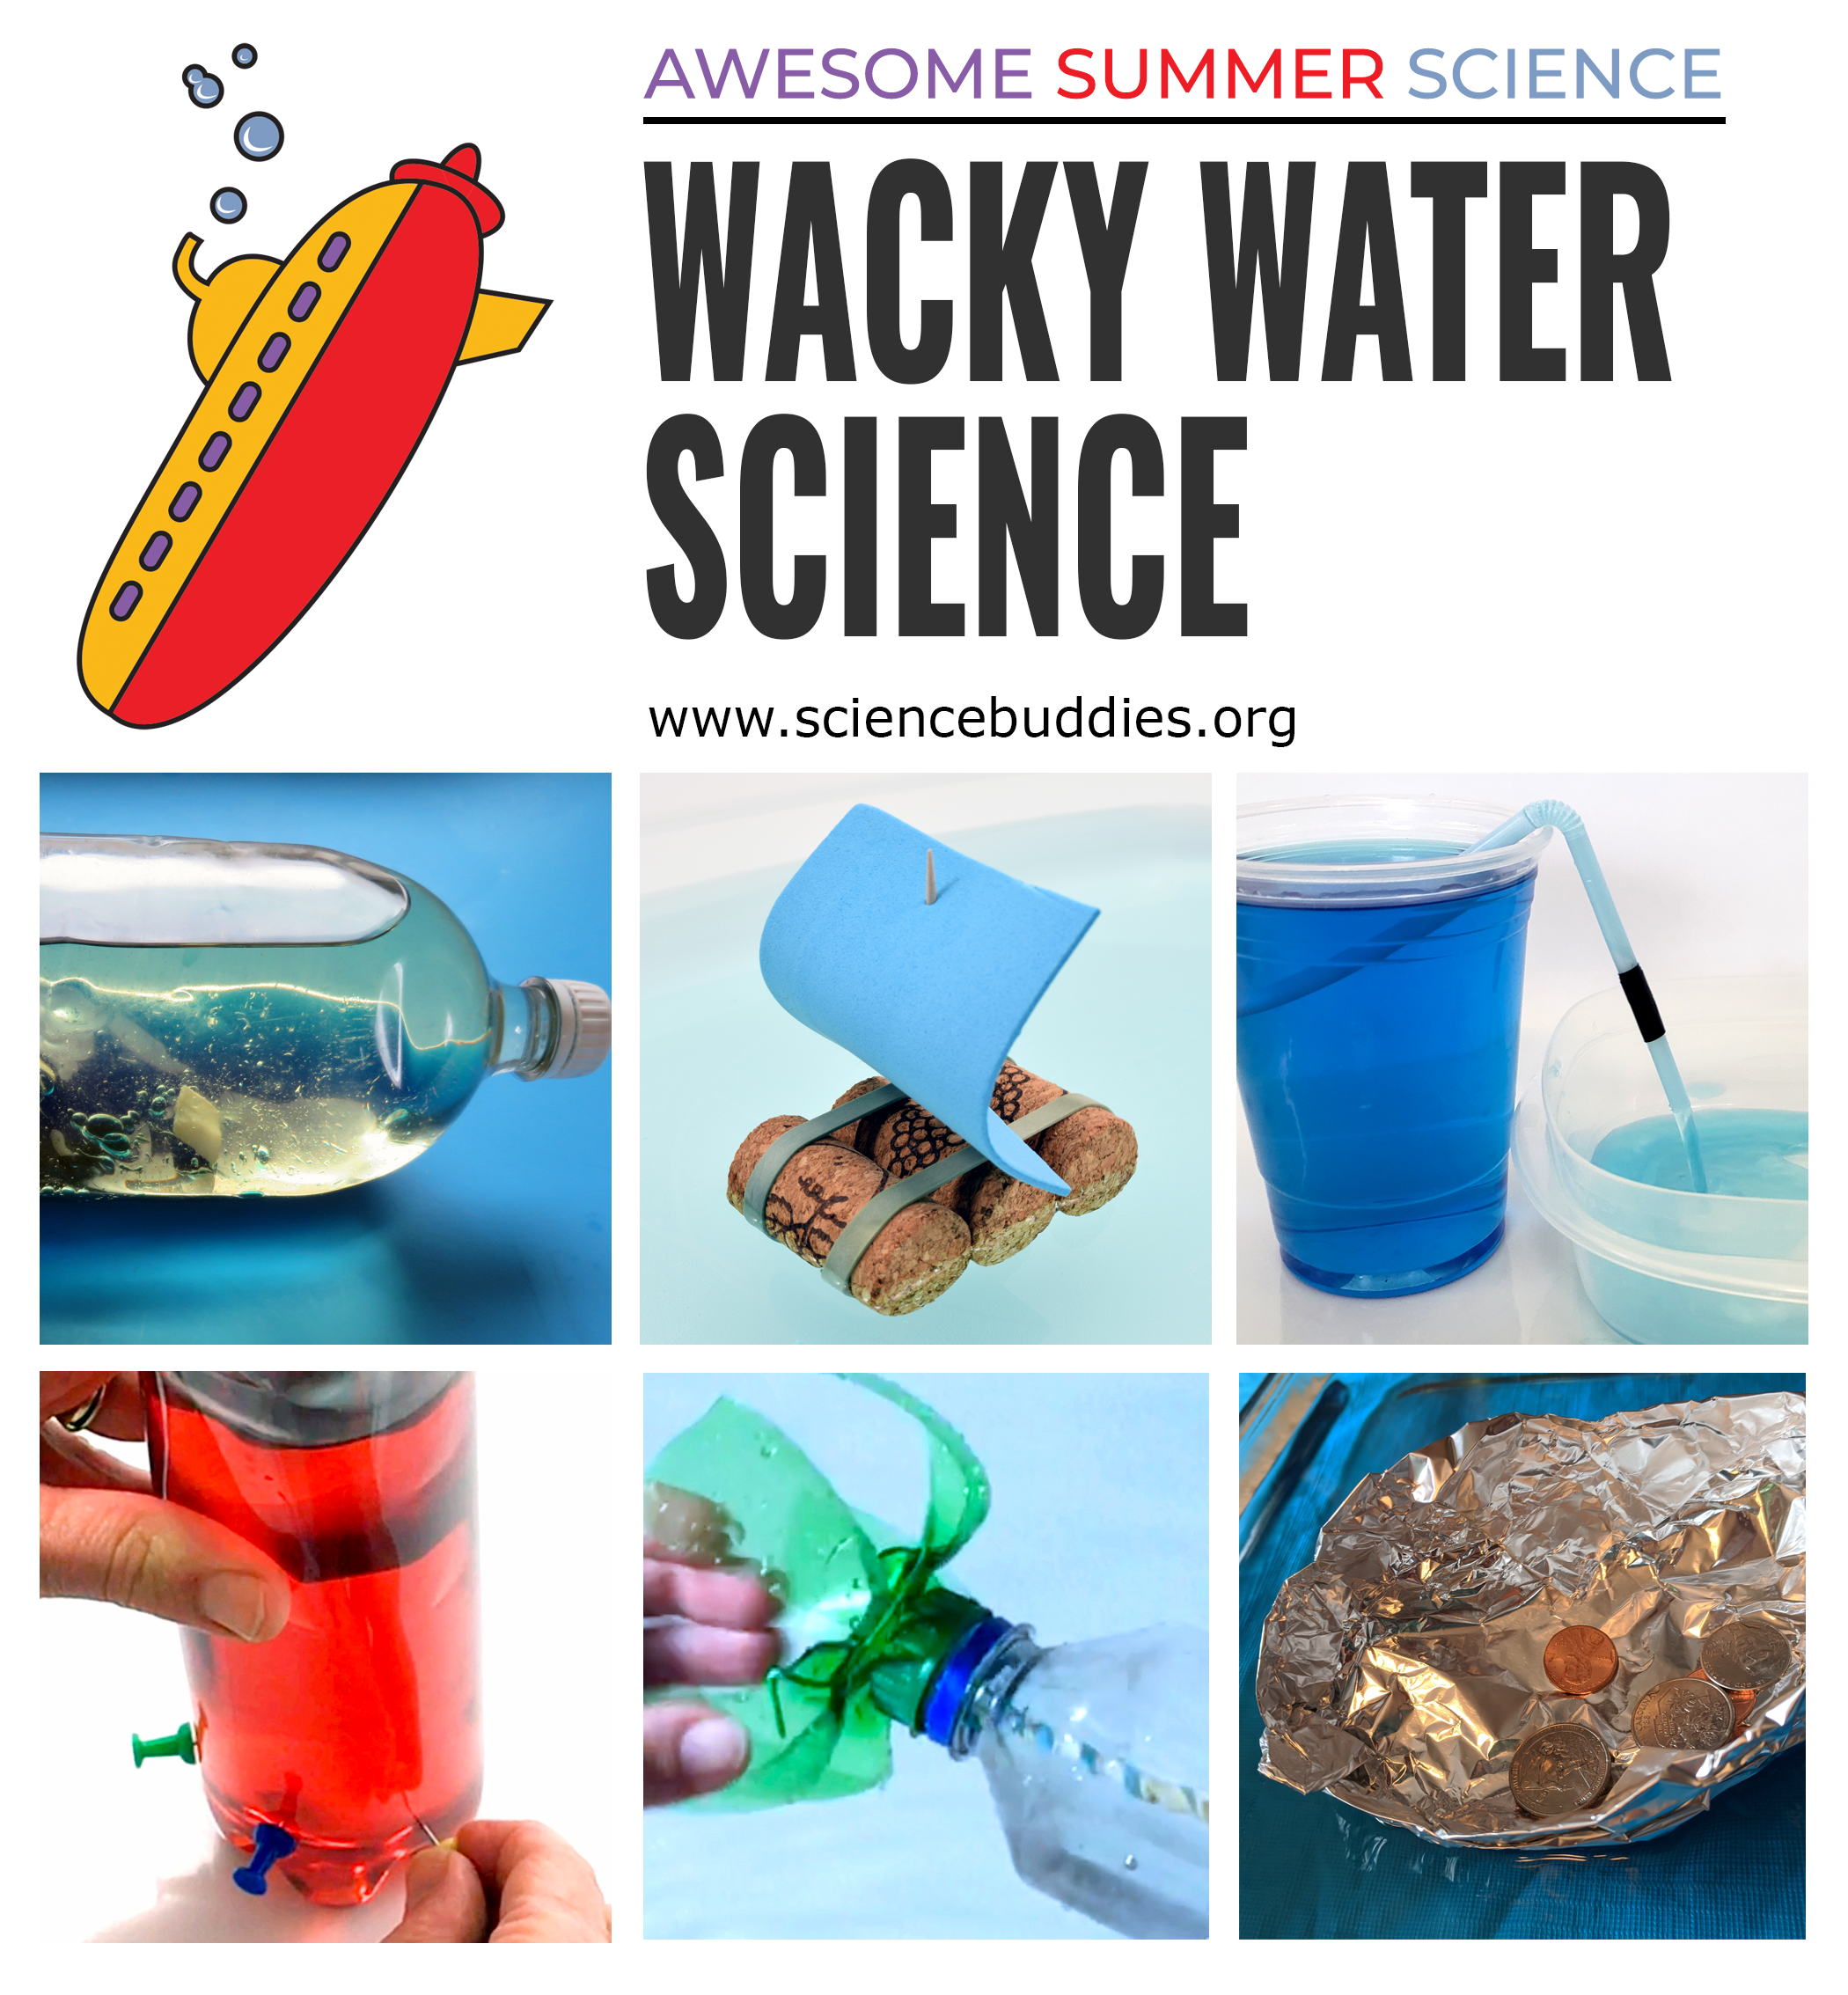 Aluminum foil boat, cork sailboat, bottle submarine, straw siphon, and bottle with pushpins poked through for Wacky Water Week 8 - part of Awesome Summer Science Experiments series